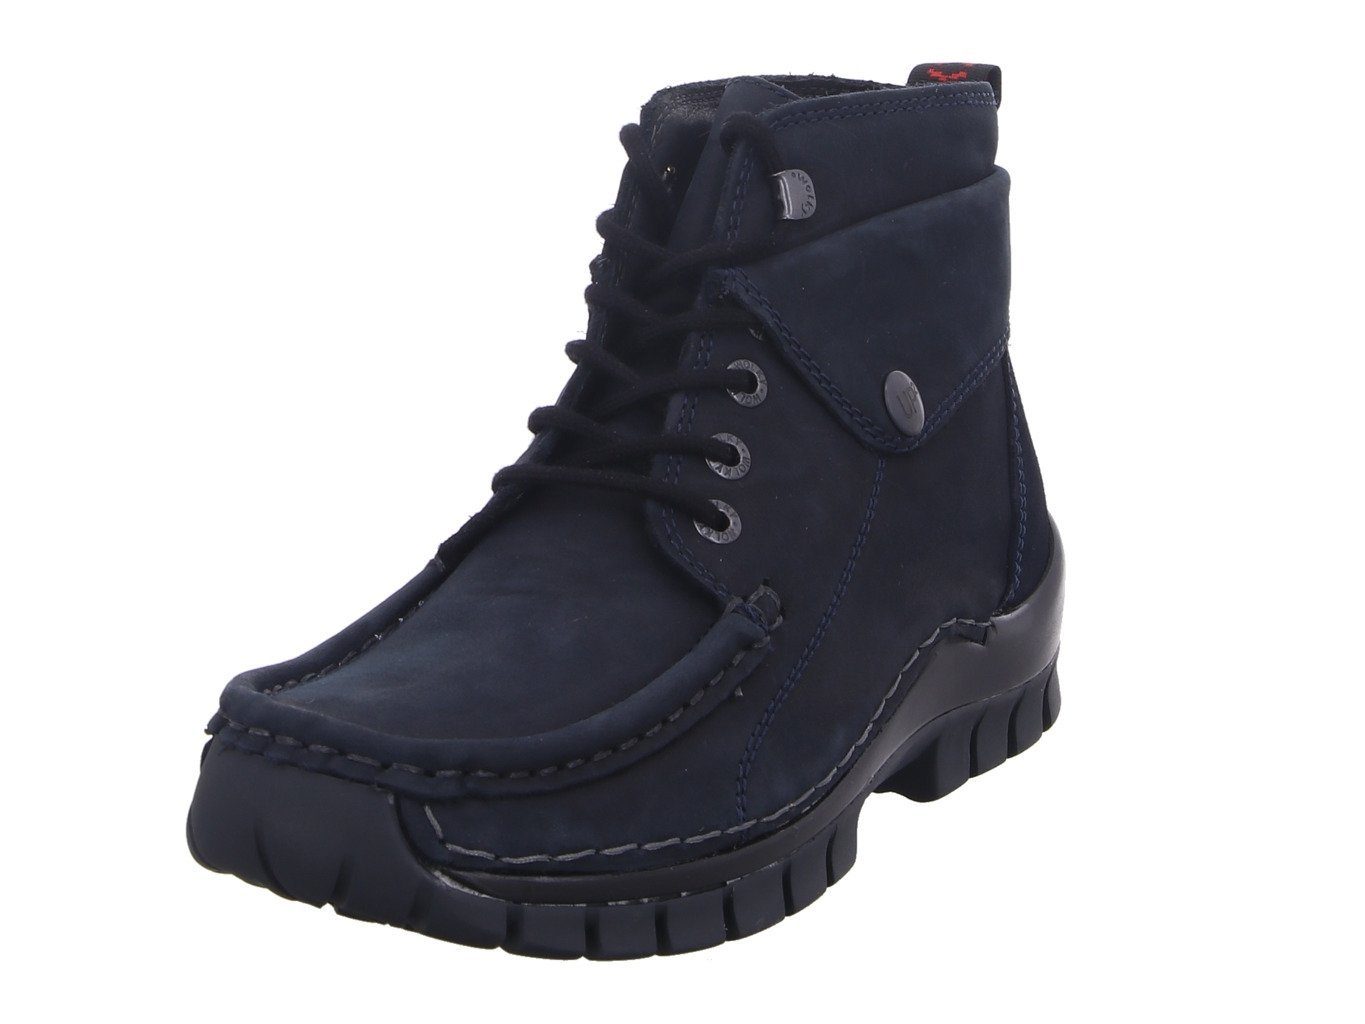 WOLKY Jump Winter blau Ankleboots